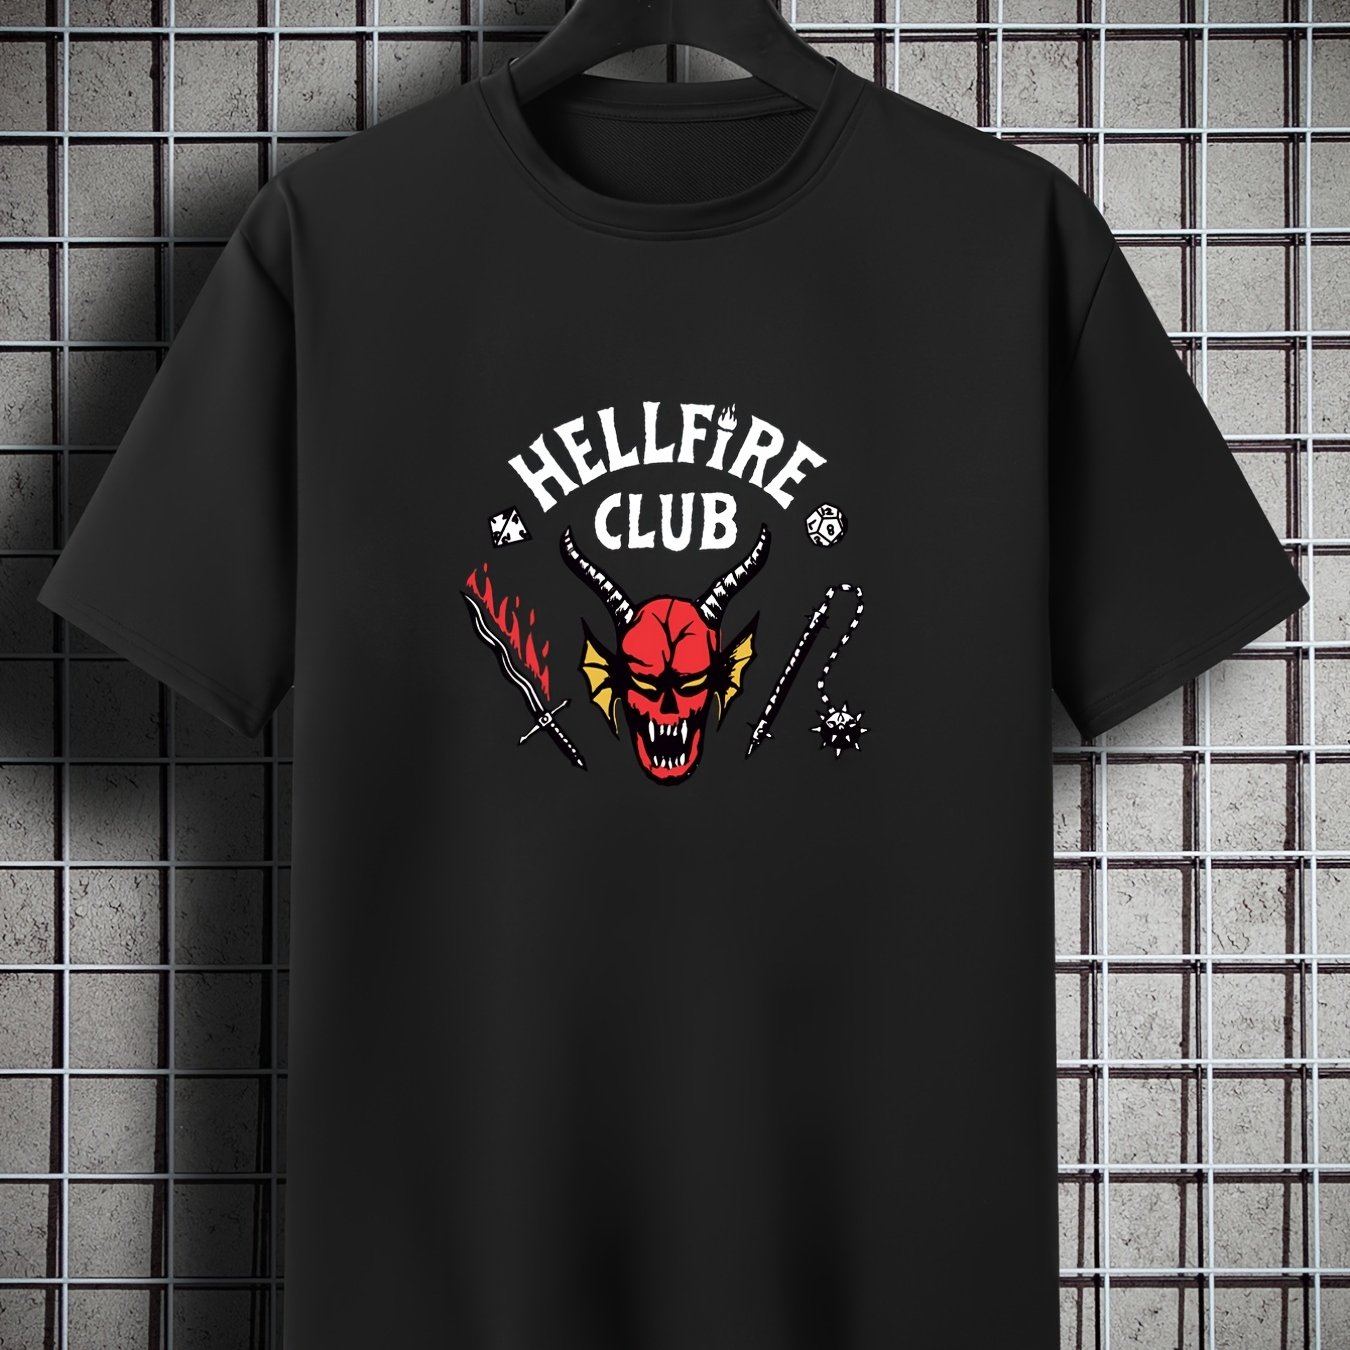 ᓚᘏᗢ nade on X: hellfire club shirt i made for cult pixie! 👹    / X